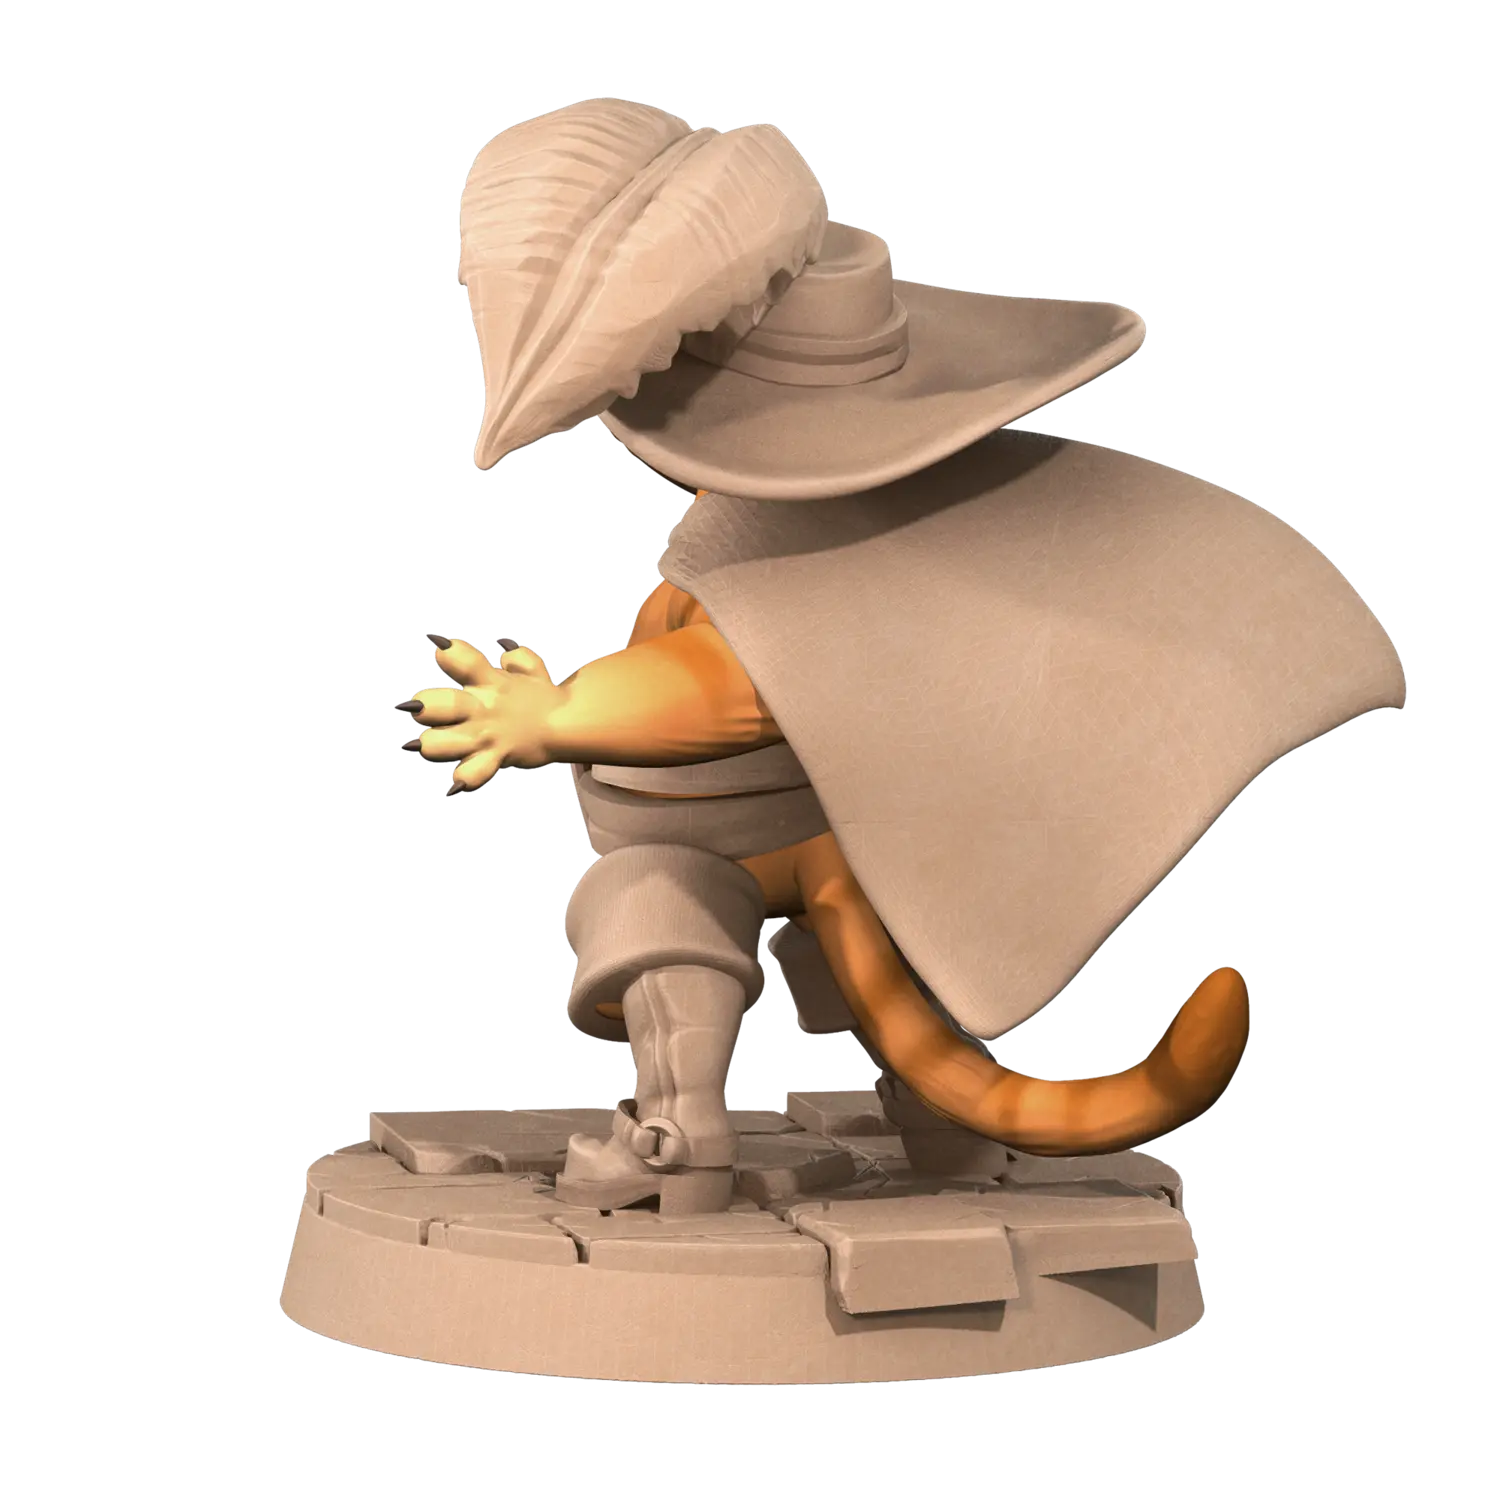 DnD Fighter - Miniature - Ranger - Rogue - Tabaxi Zentaris  Fighter - Miniature - Ranger - Rogue - Tabaxi sold by DoubleHitShop